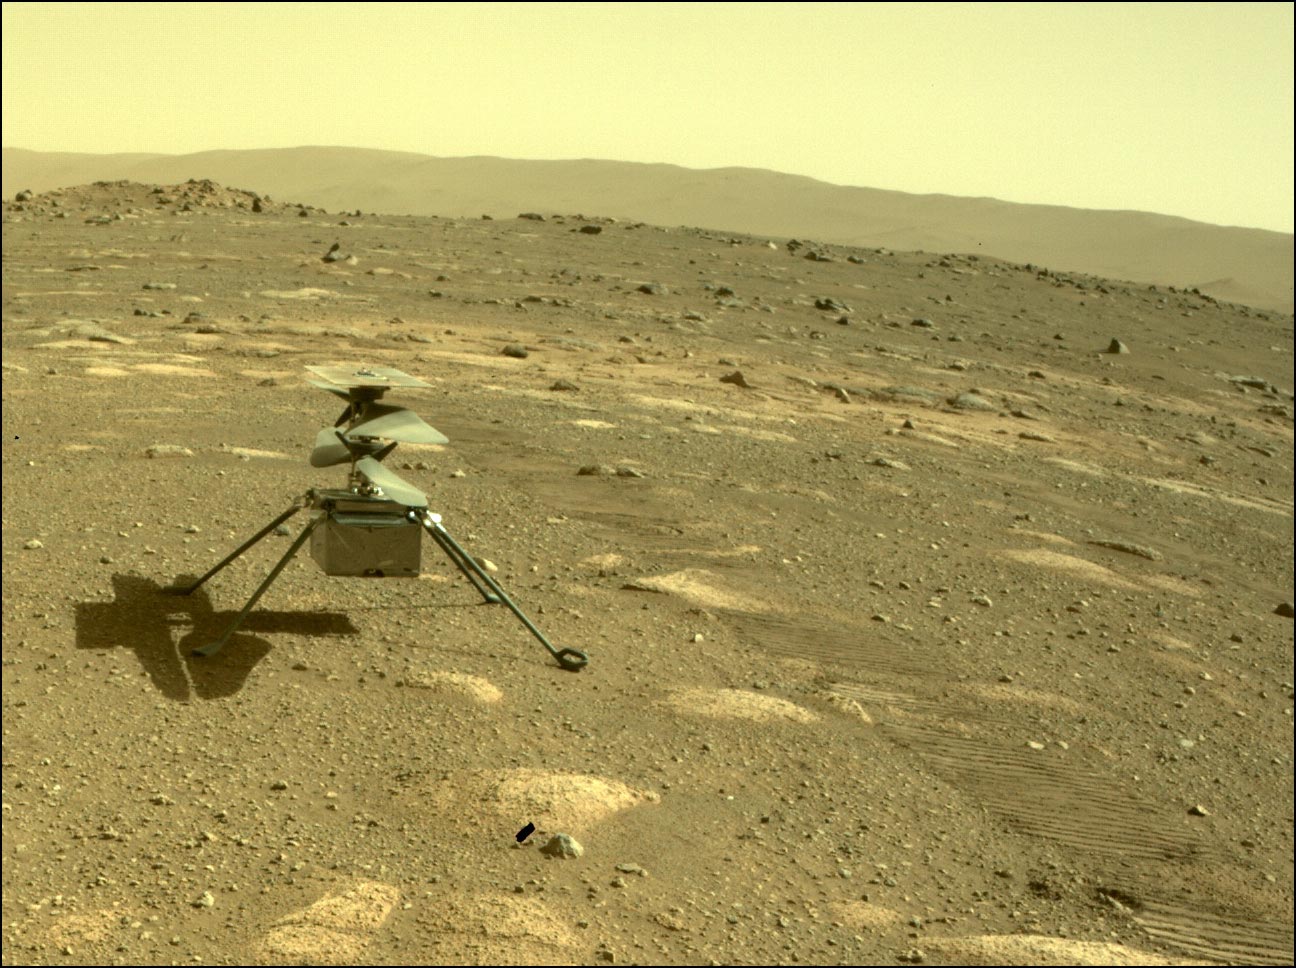 nasa-s-ingenuity-mars-helicopter-survives-first-frigid-martian-night-on